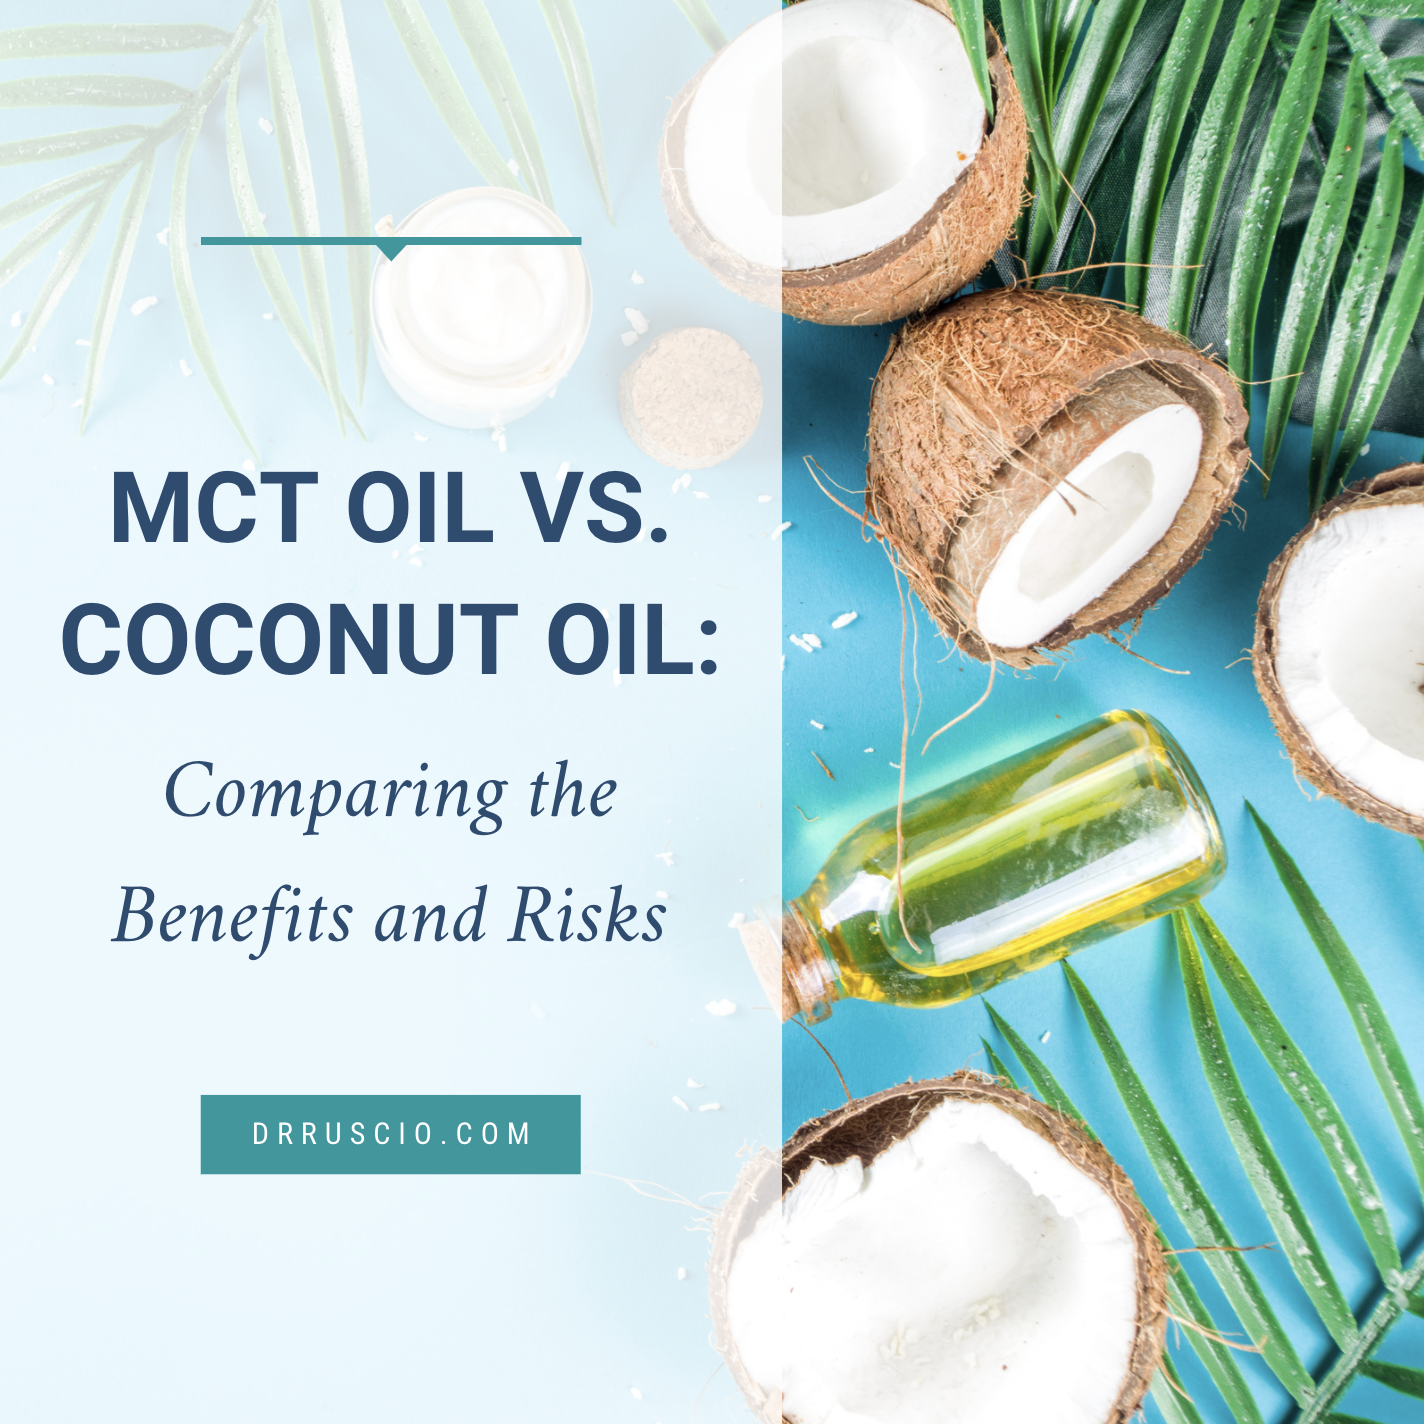 MCT Oil vs. Coconut Oil: Comparing the Benefits and Risks